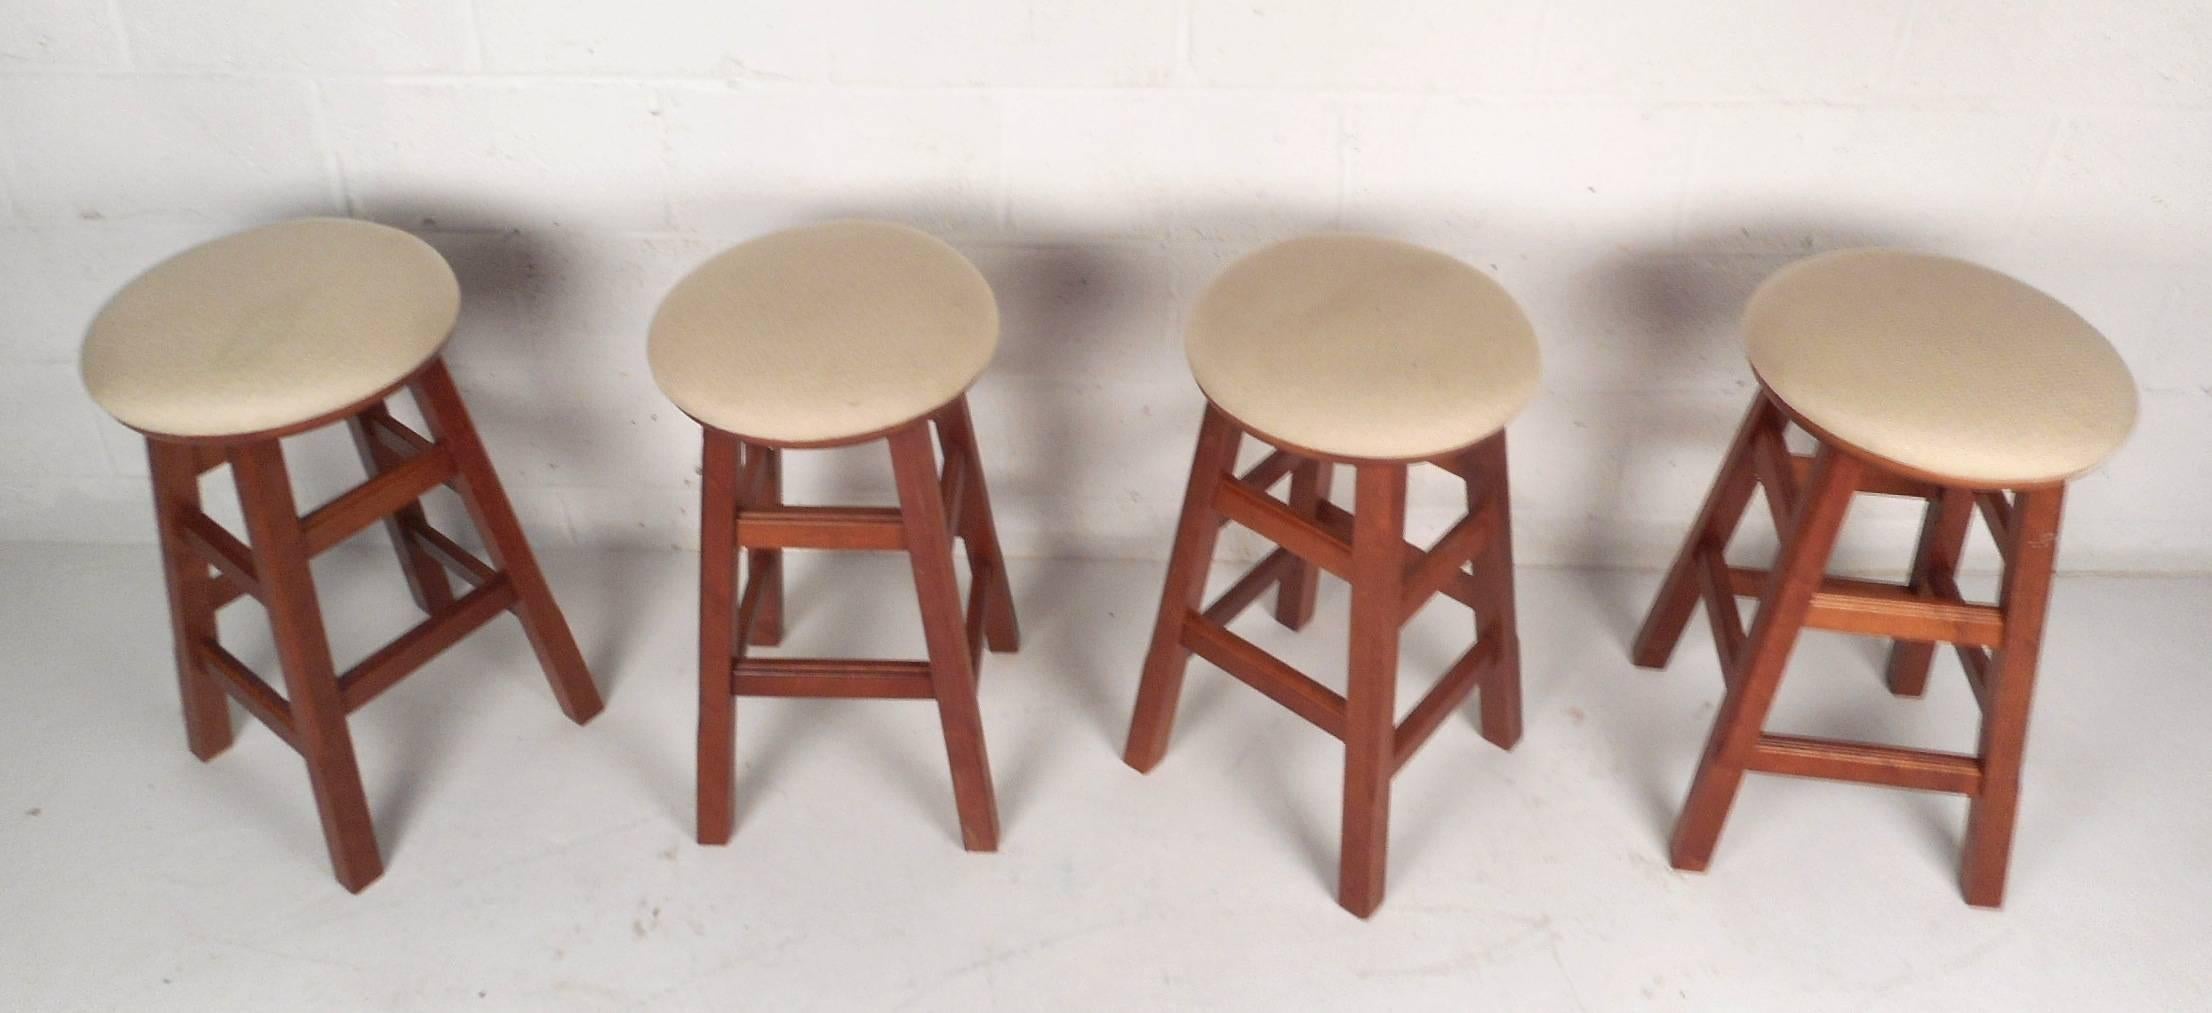 This beautiful set of four Mid-Century Modern style stools feature unique rotating seats with lovely white upholstery. This stylish set have sturdy wood frames with multiple stretchers that function as kick rests. Unusual design has a hidden ability